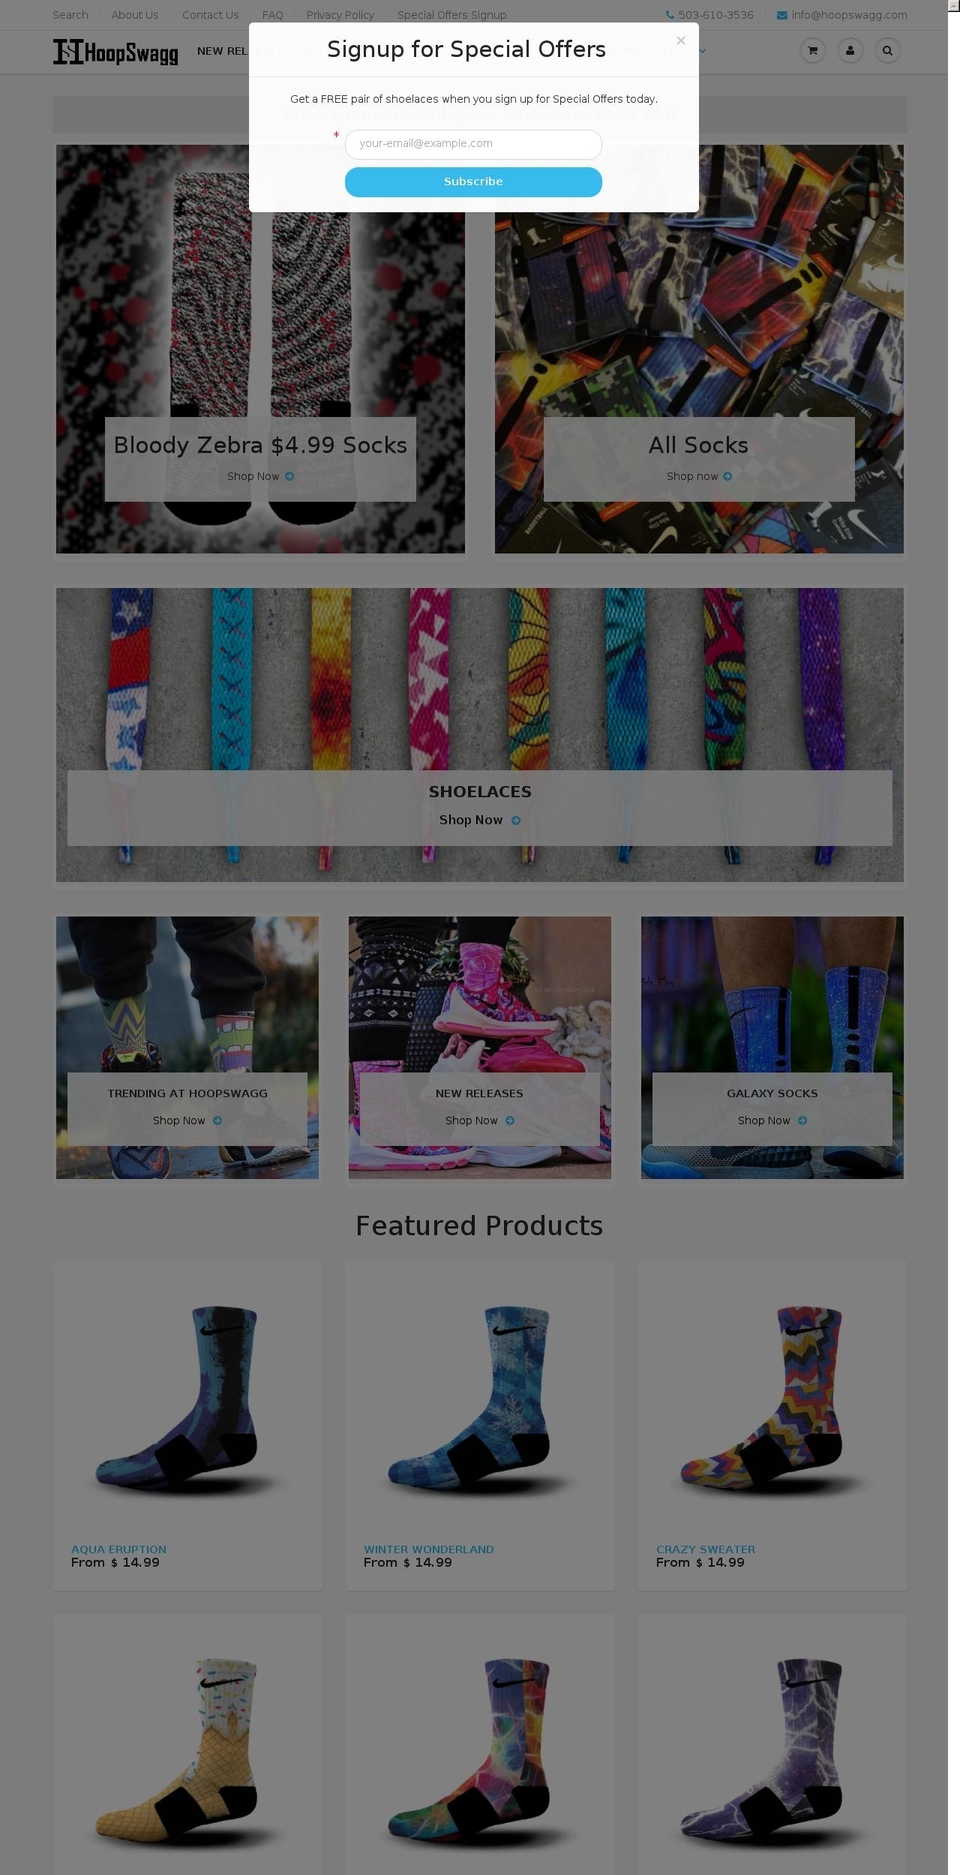 bf-updates Shopify theme site example hoopswagg.com